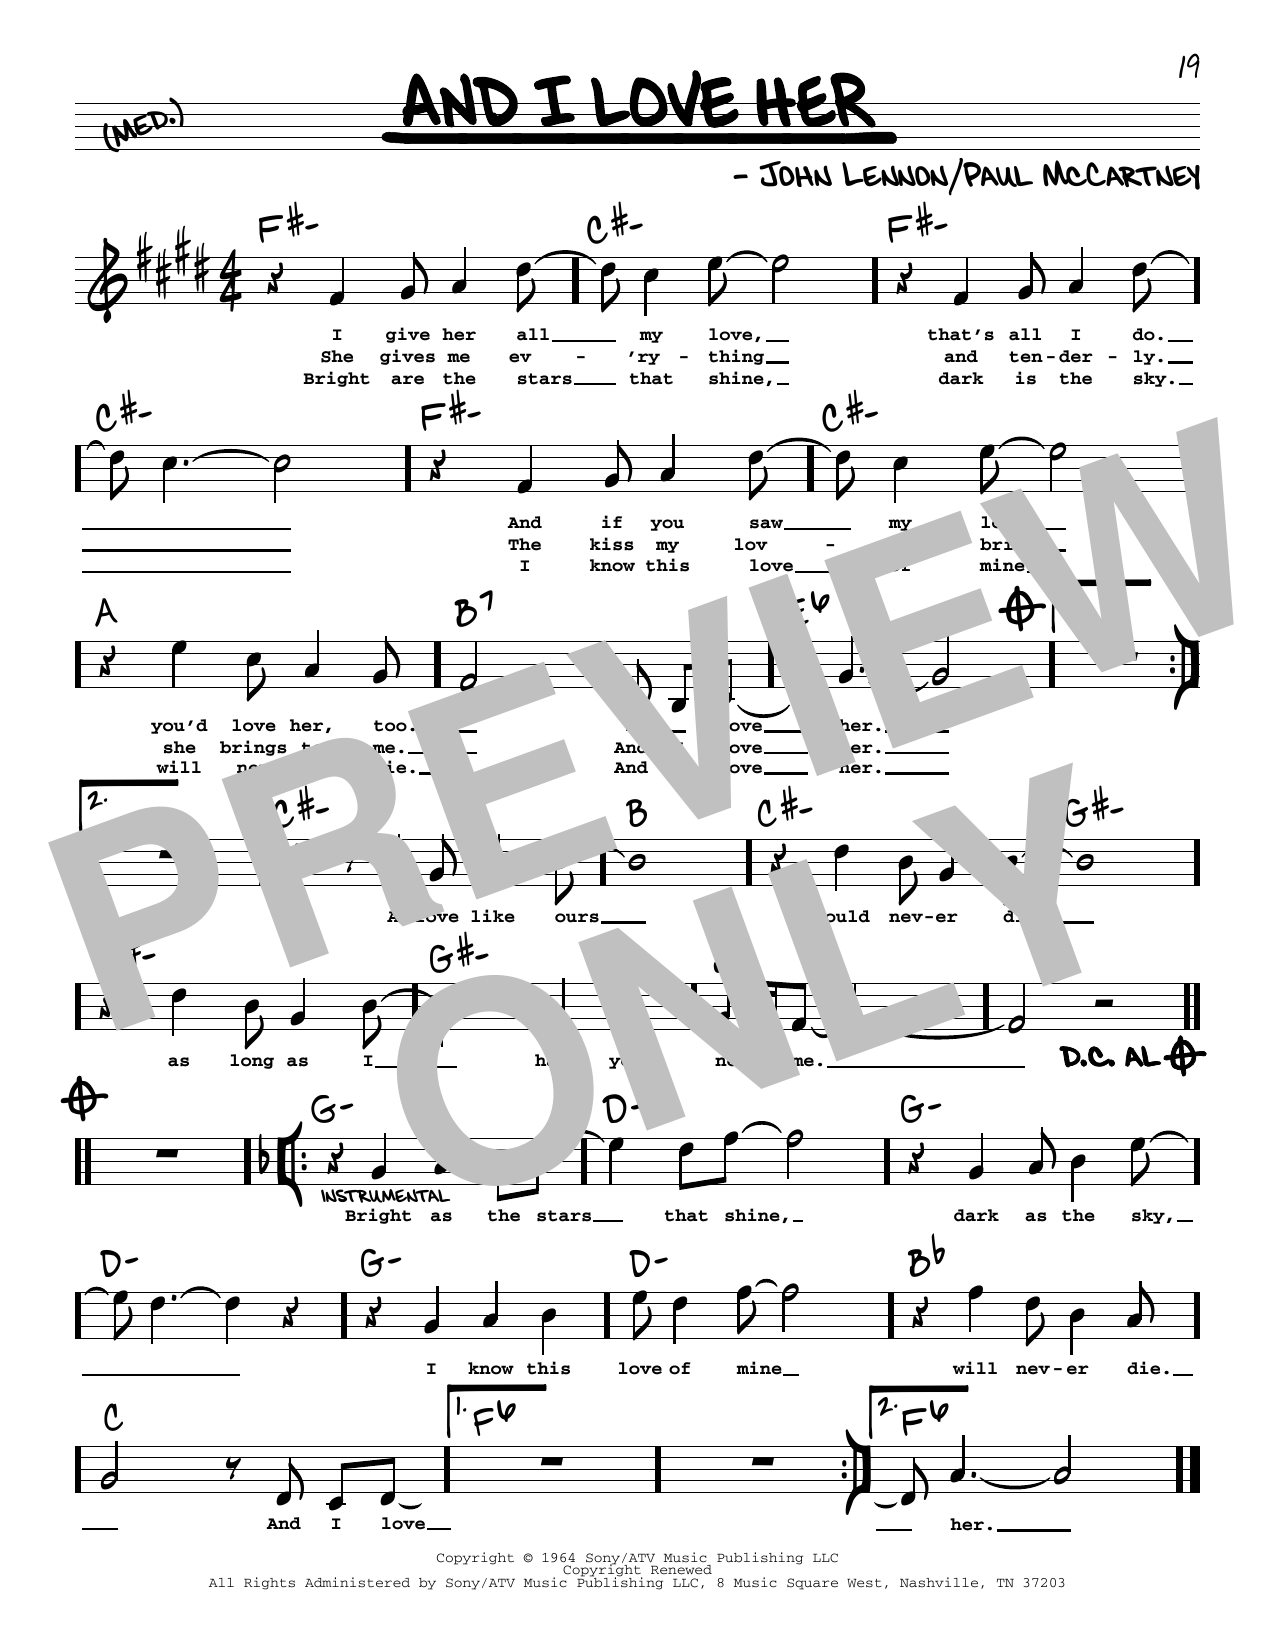 Download The Beatles And I Love Her (High Voice) Sheet Music